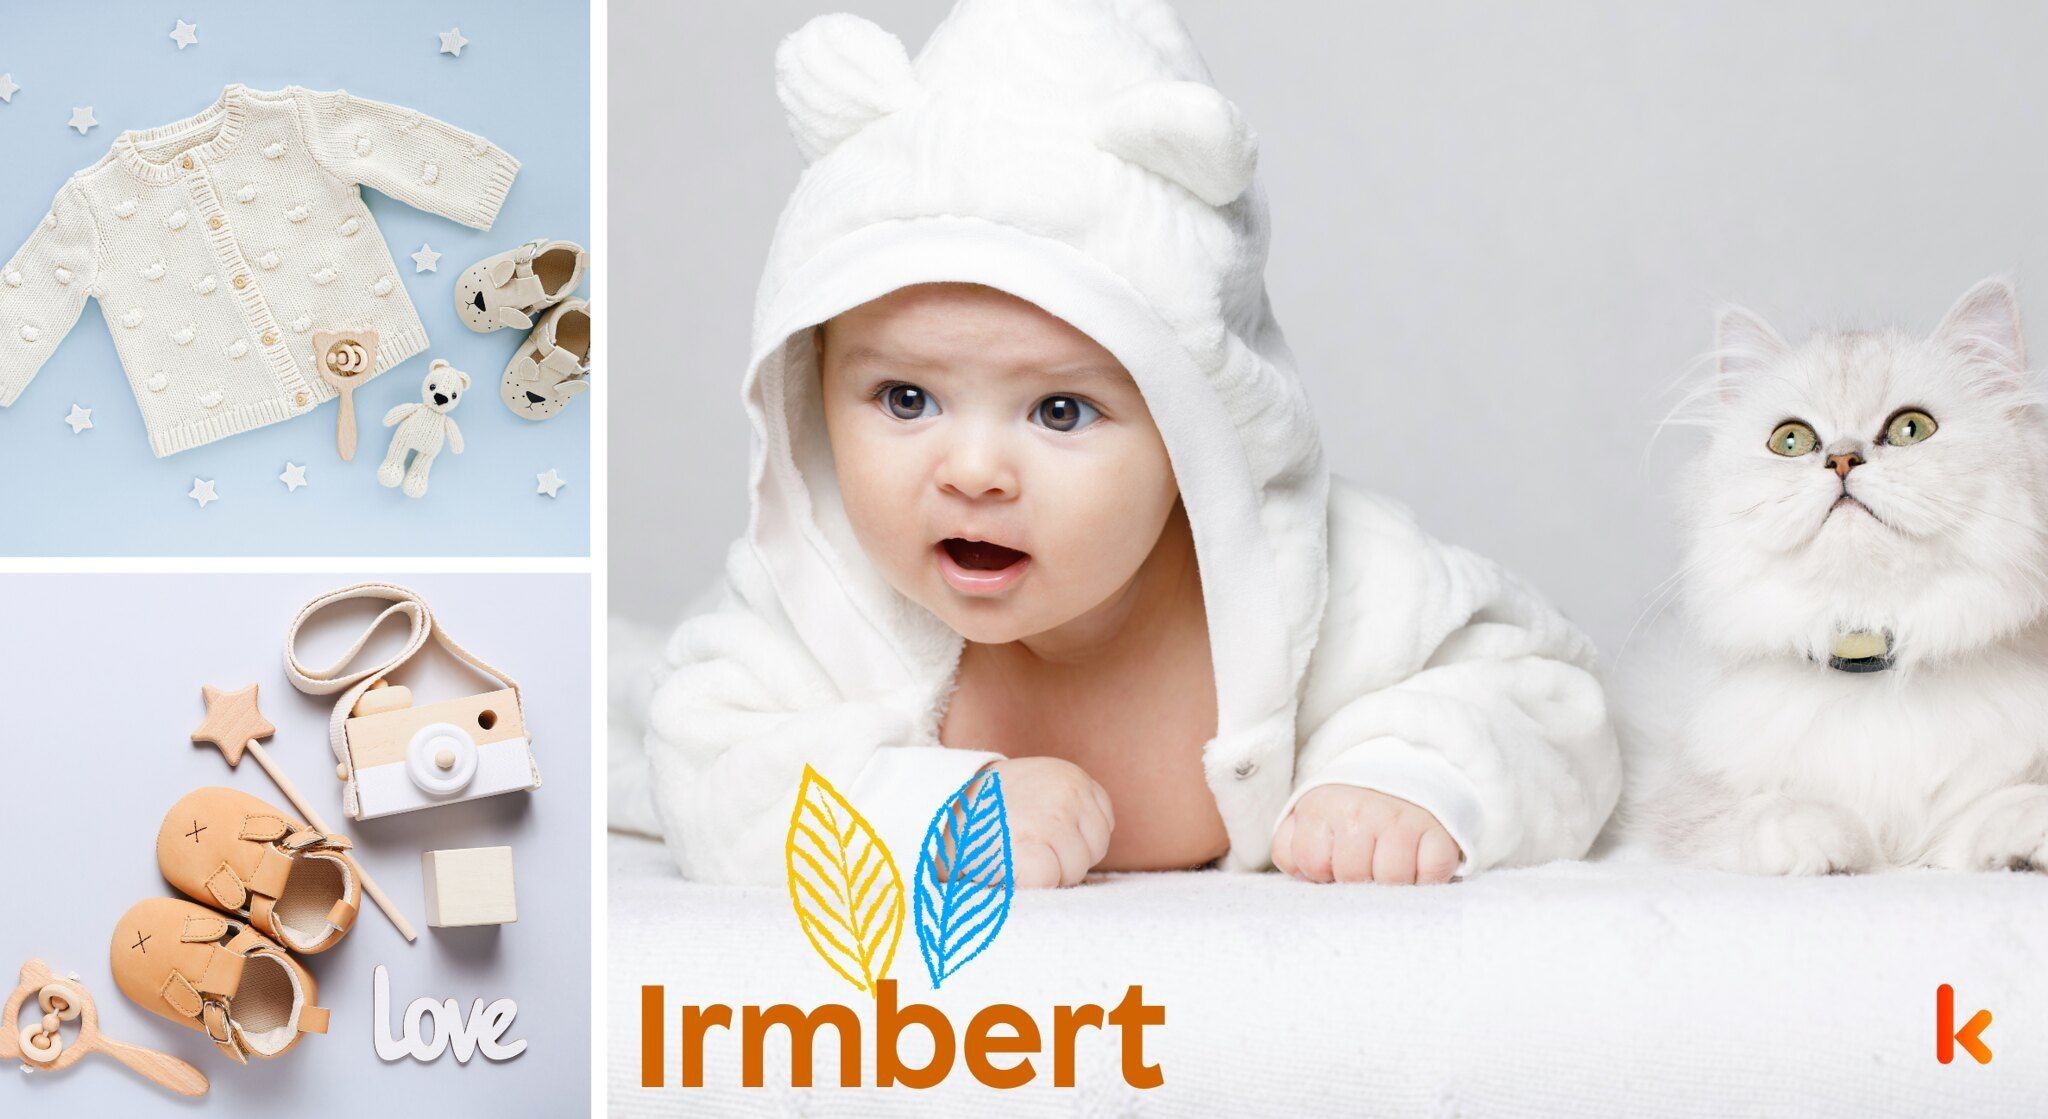 Meaning of the name Irmbert